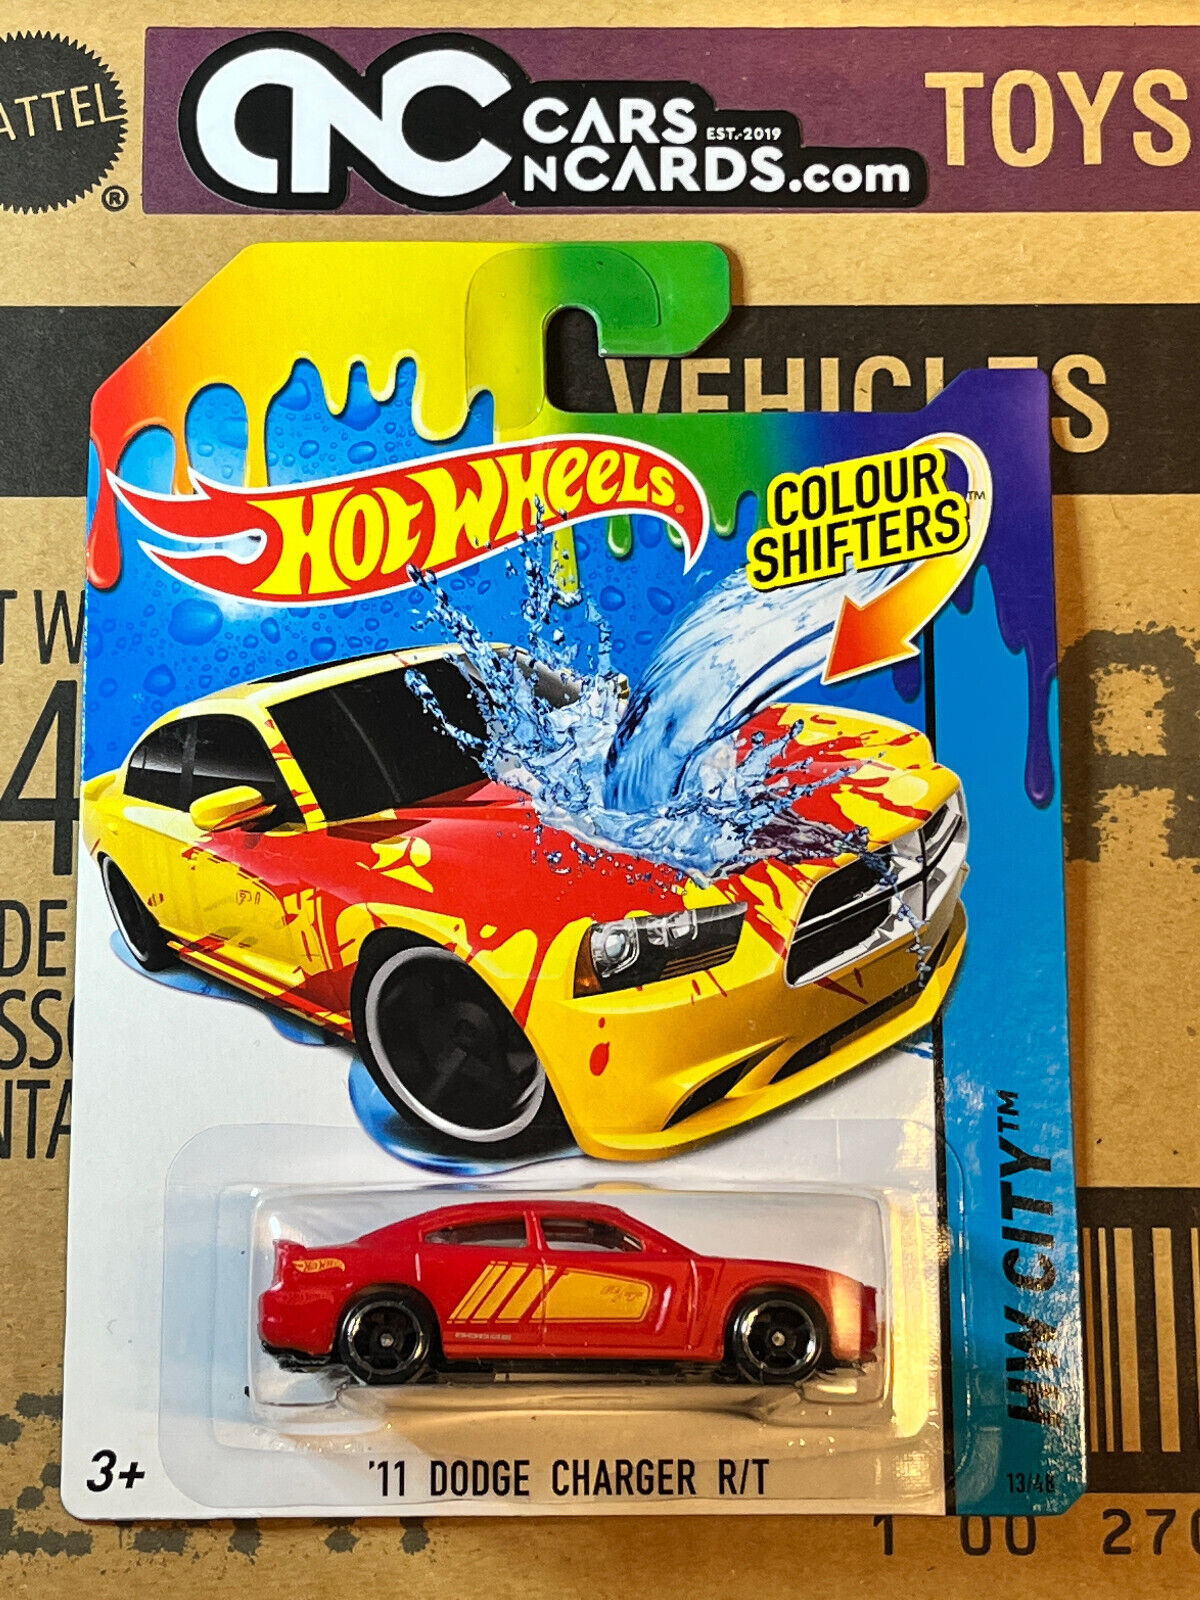 2014 Hot Wheels Colour Shifters HW City '11 Dodge Charger R/T NIP